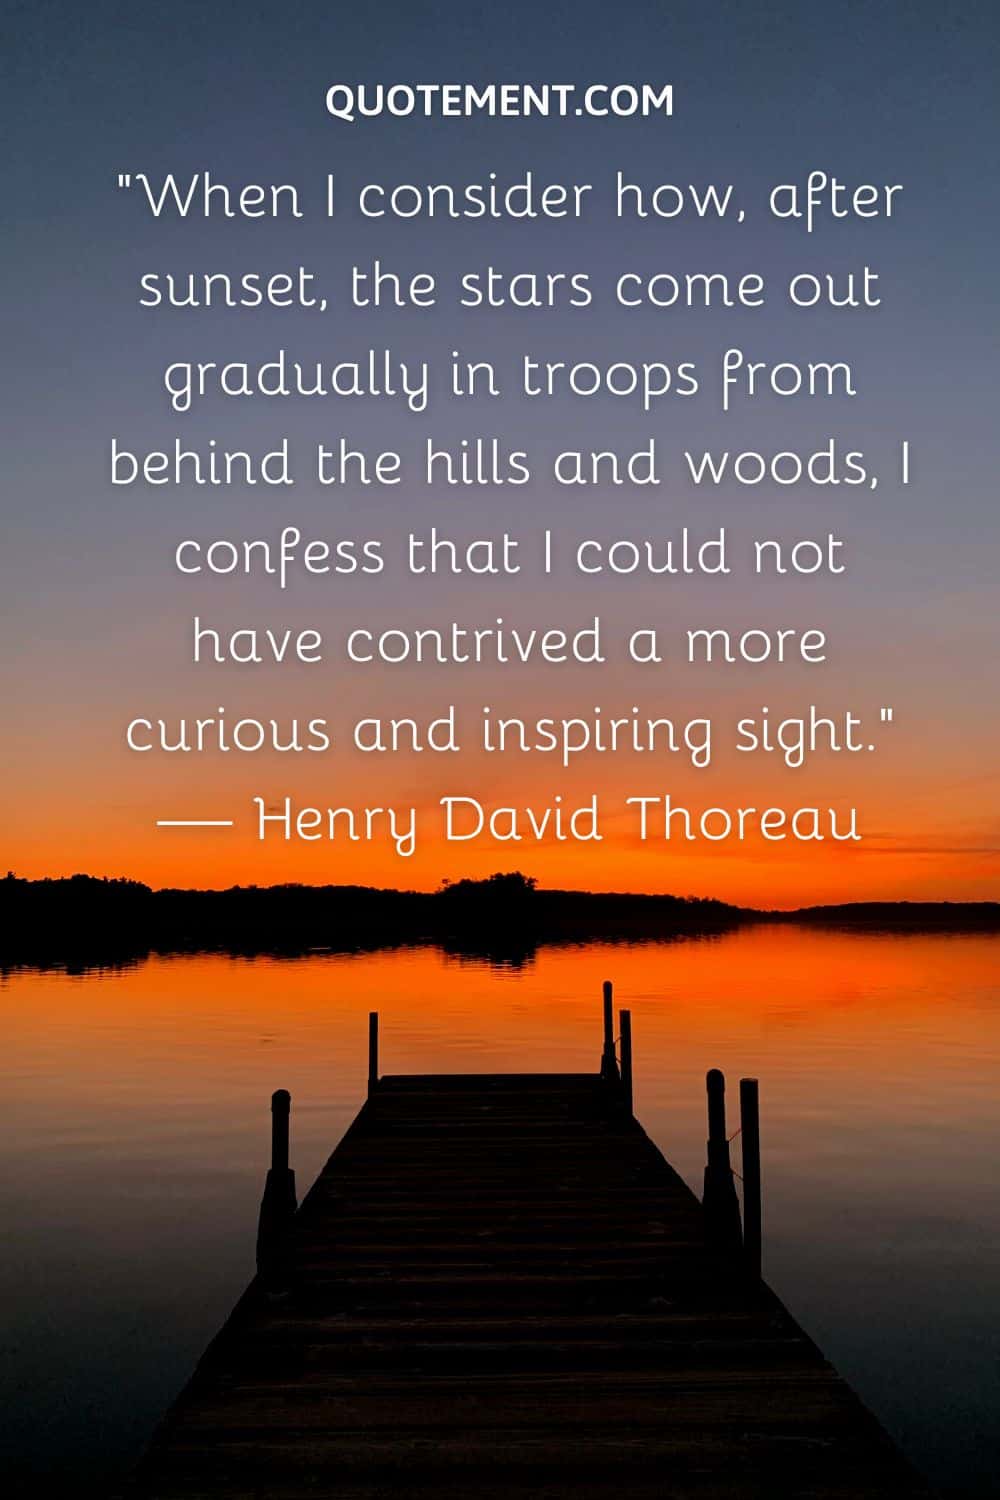 “When I consider how, after sunset, the stars come out gradually in troops from behind the hills and woods,